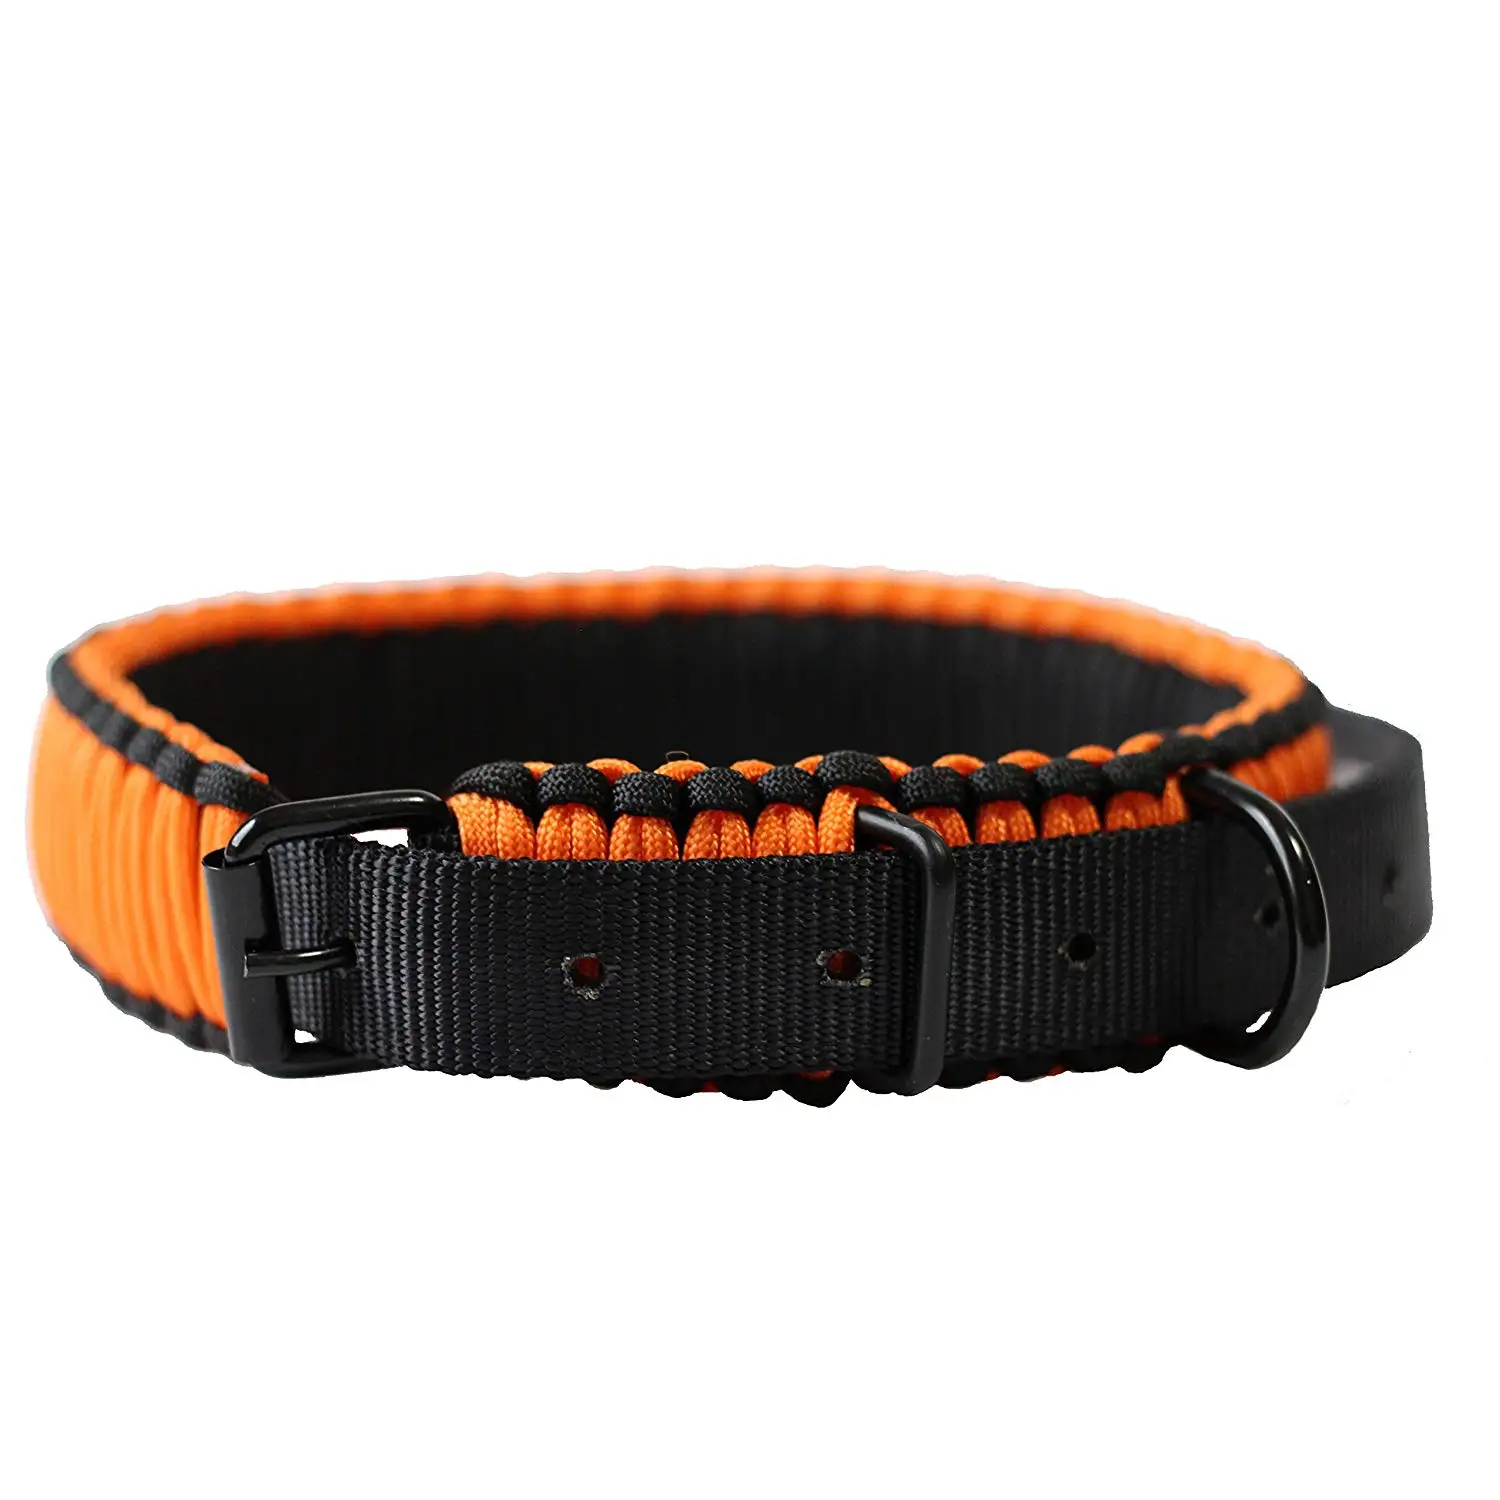 Paracord Dog Collar Tutorial Instructions How To Get